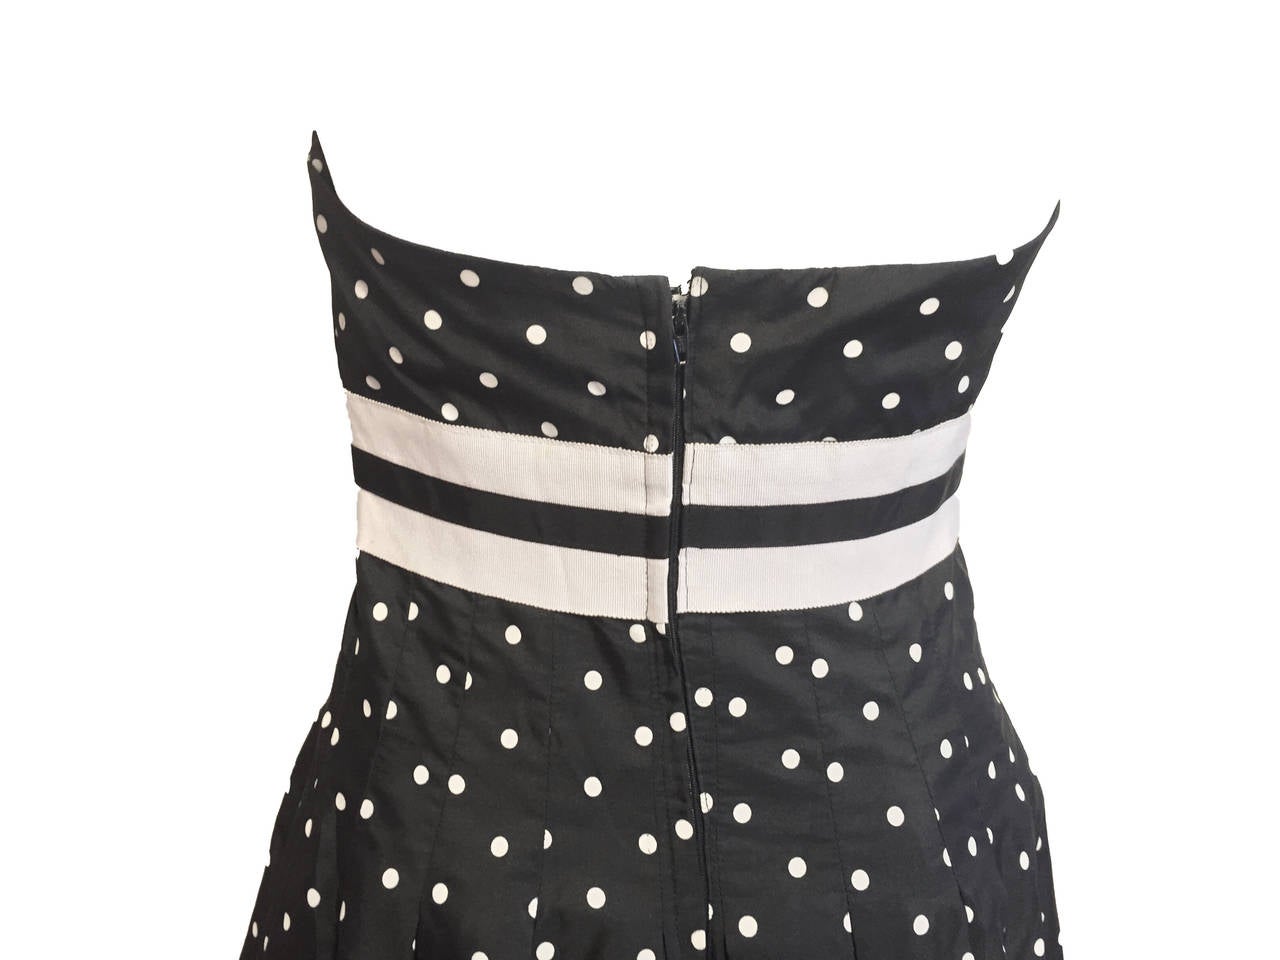 Victor Costa Famous Black & White Dot Dress For Sale 2